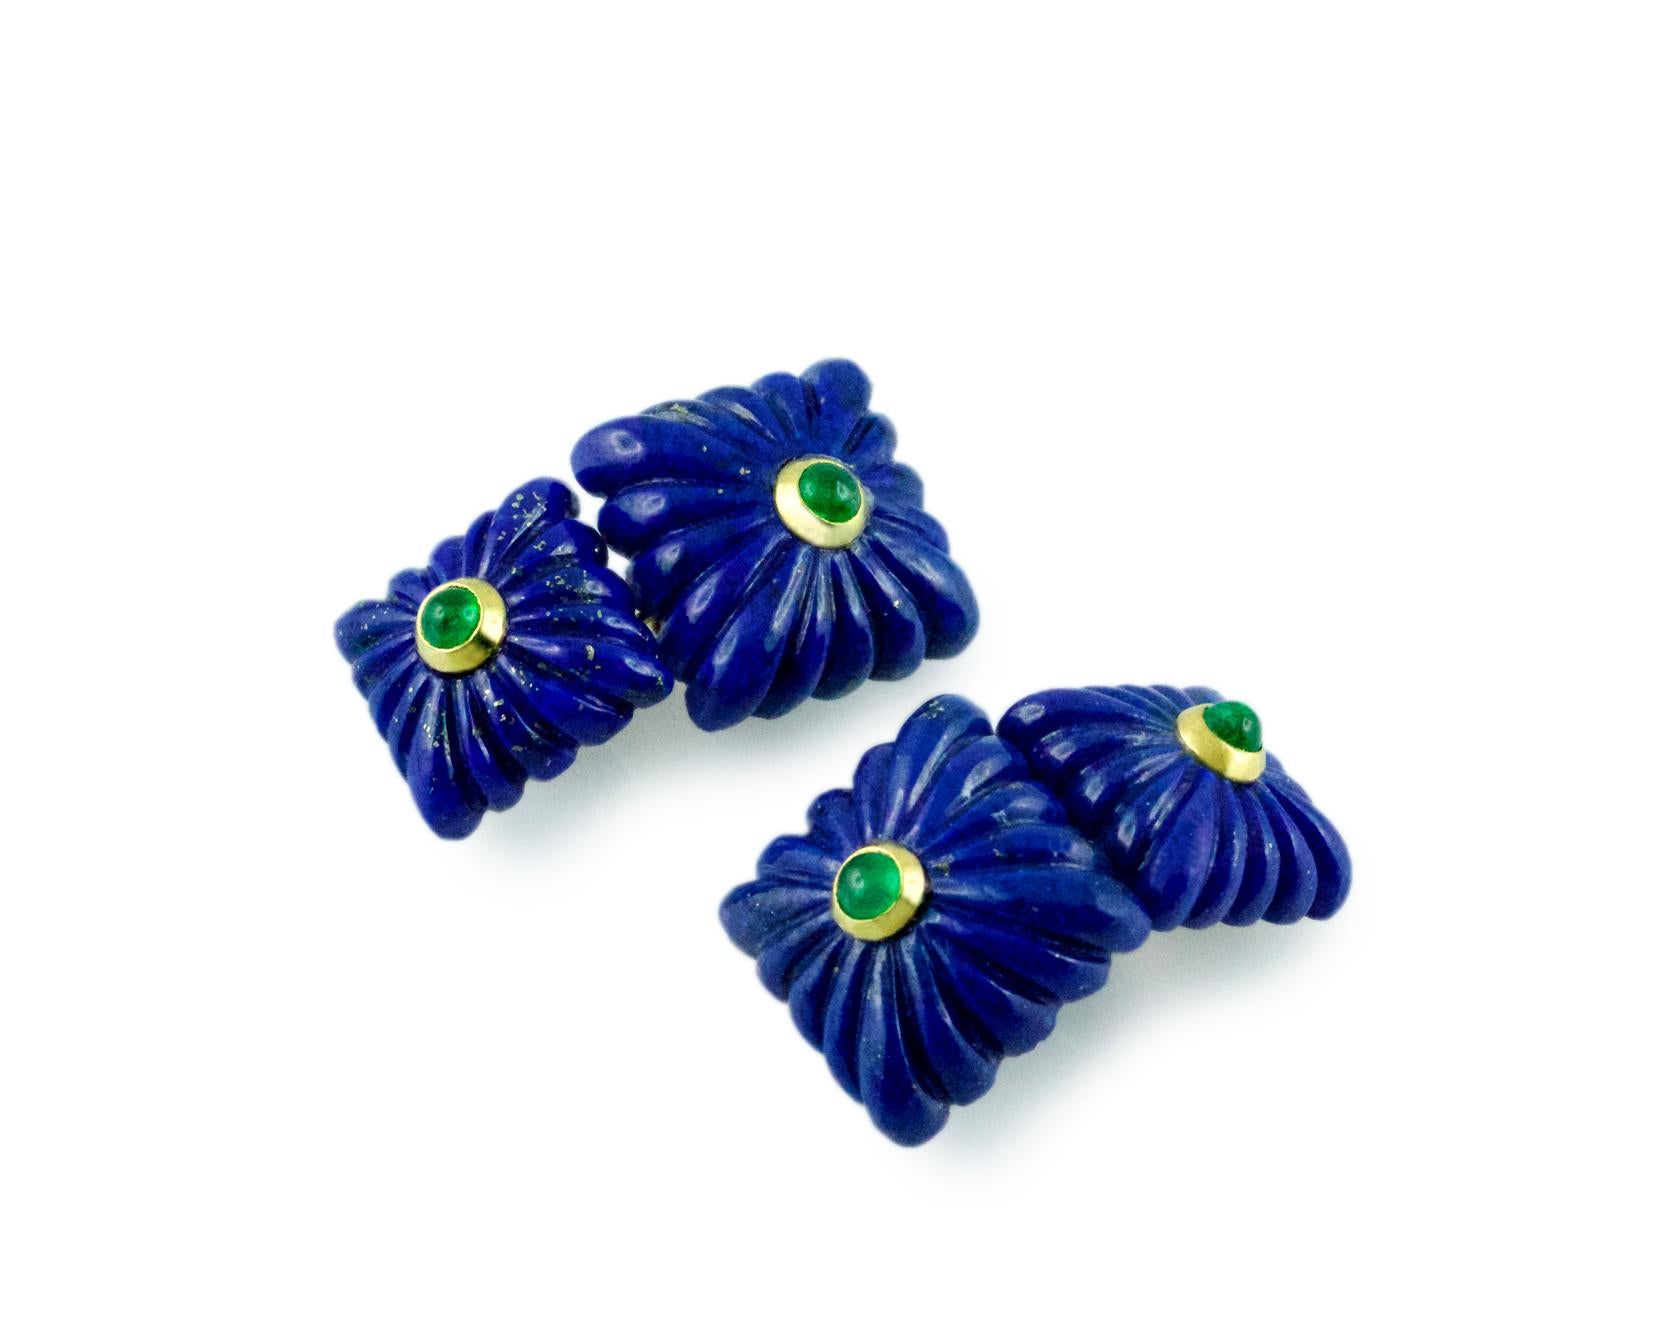 These striking cufflinks are entirely made of lapis lazuli, whose striking deep blue shade highlights the classic “fesonato” texture of front face and toggle. Both elements feature a squared shape that is adorned at the center with a cabochon